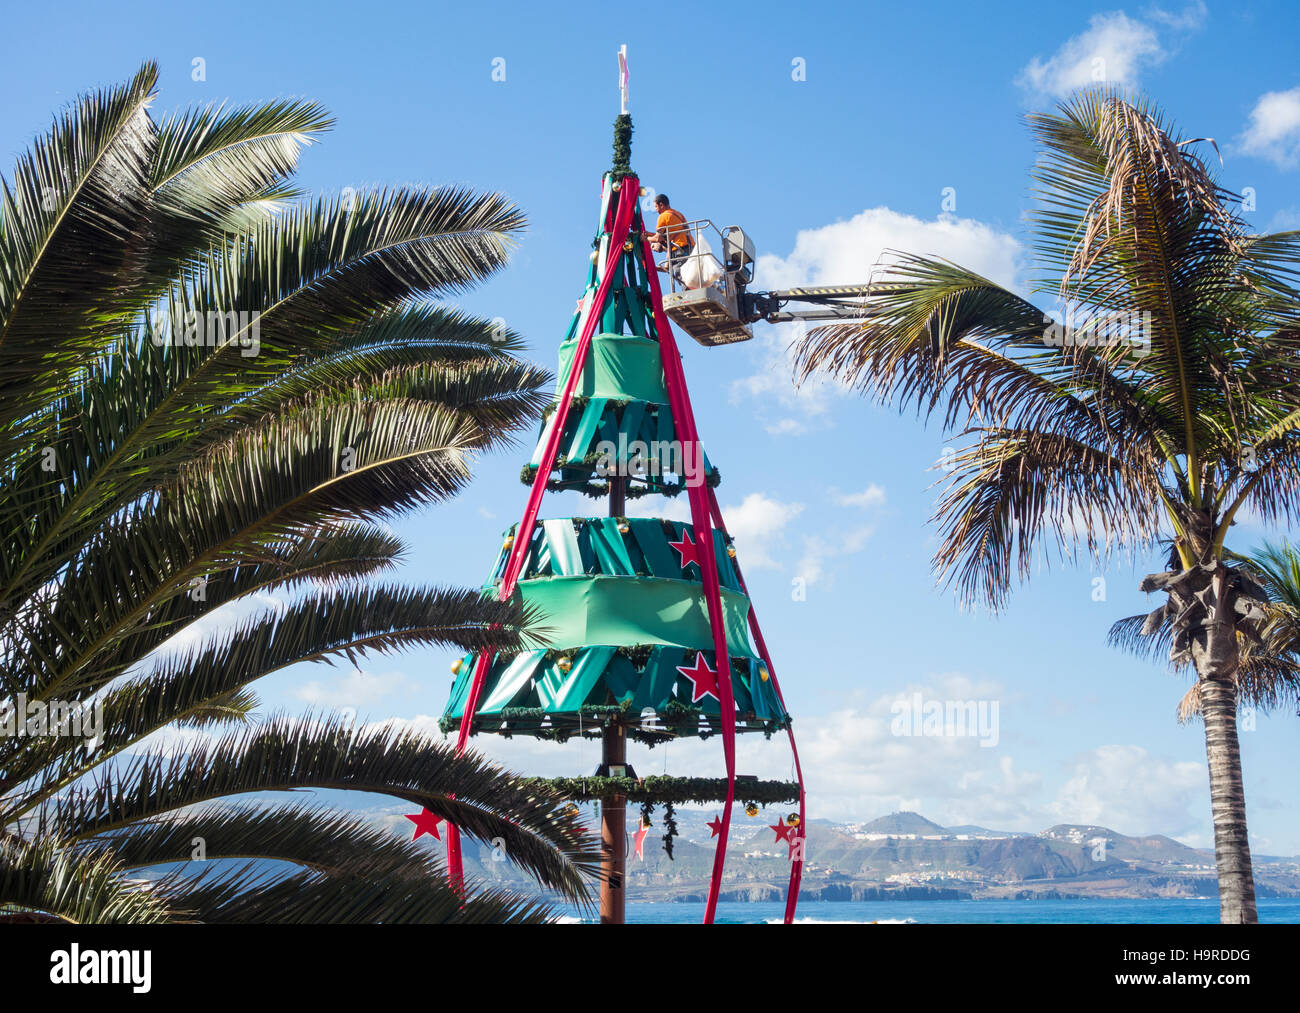 Las Palmas, Gran Canaria, Canary Islands, Spain. 25th November, 2016. Weather: A glorious Friday morning on the city beach in Las Palmas as the beach Christmas tree is decorated and mid morning temperatures hit 27 degrees Celcius. Gran Canaria is a popular winter sun destination for many from the UK.  Las Palmas was ranked as the city with the best climate in the world in a 1996 scientific study called ‘Pleasant Weather Ratings’, by Thomas Whitmore, director of research on climatology at Syracuse University, New York. Credit:  Alan Dawson News/Alamy Live News Stock Photo